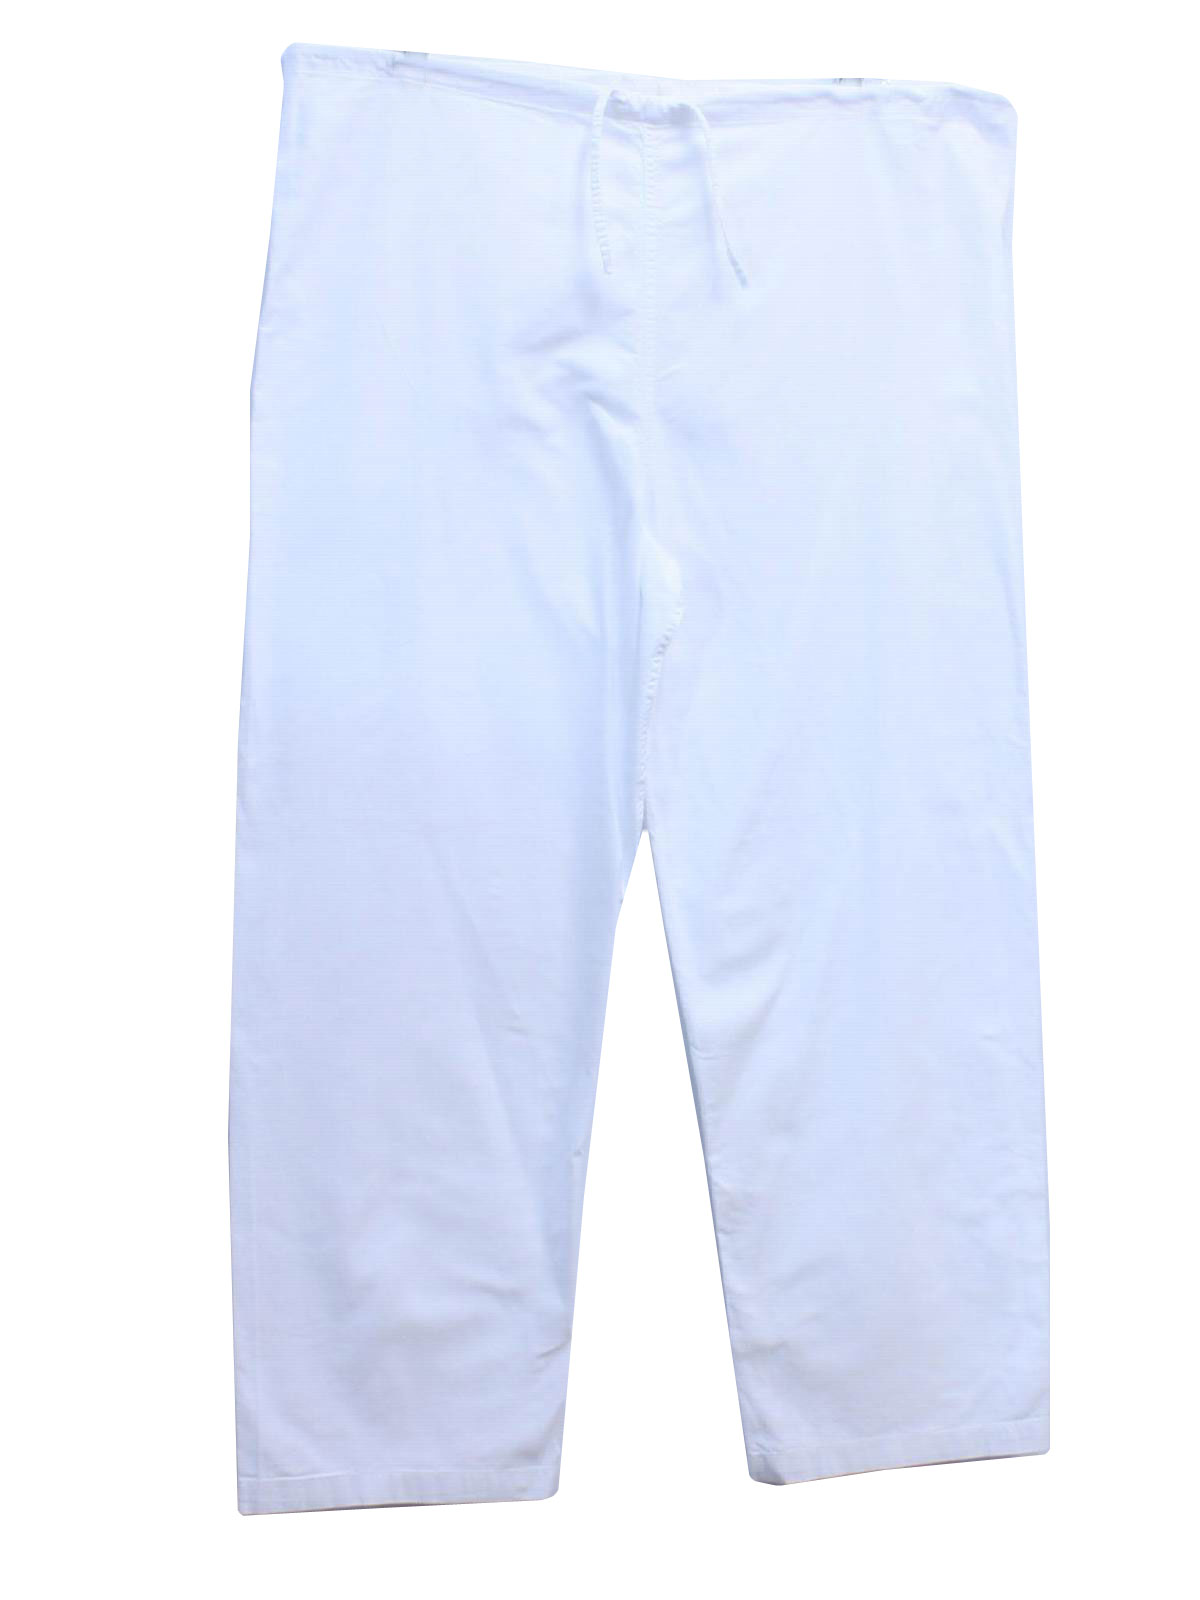 Vintage 1950's Pants: 50s -Whitehouse Chicago- Mens white cotton muslin ...